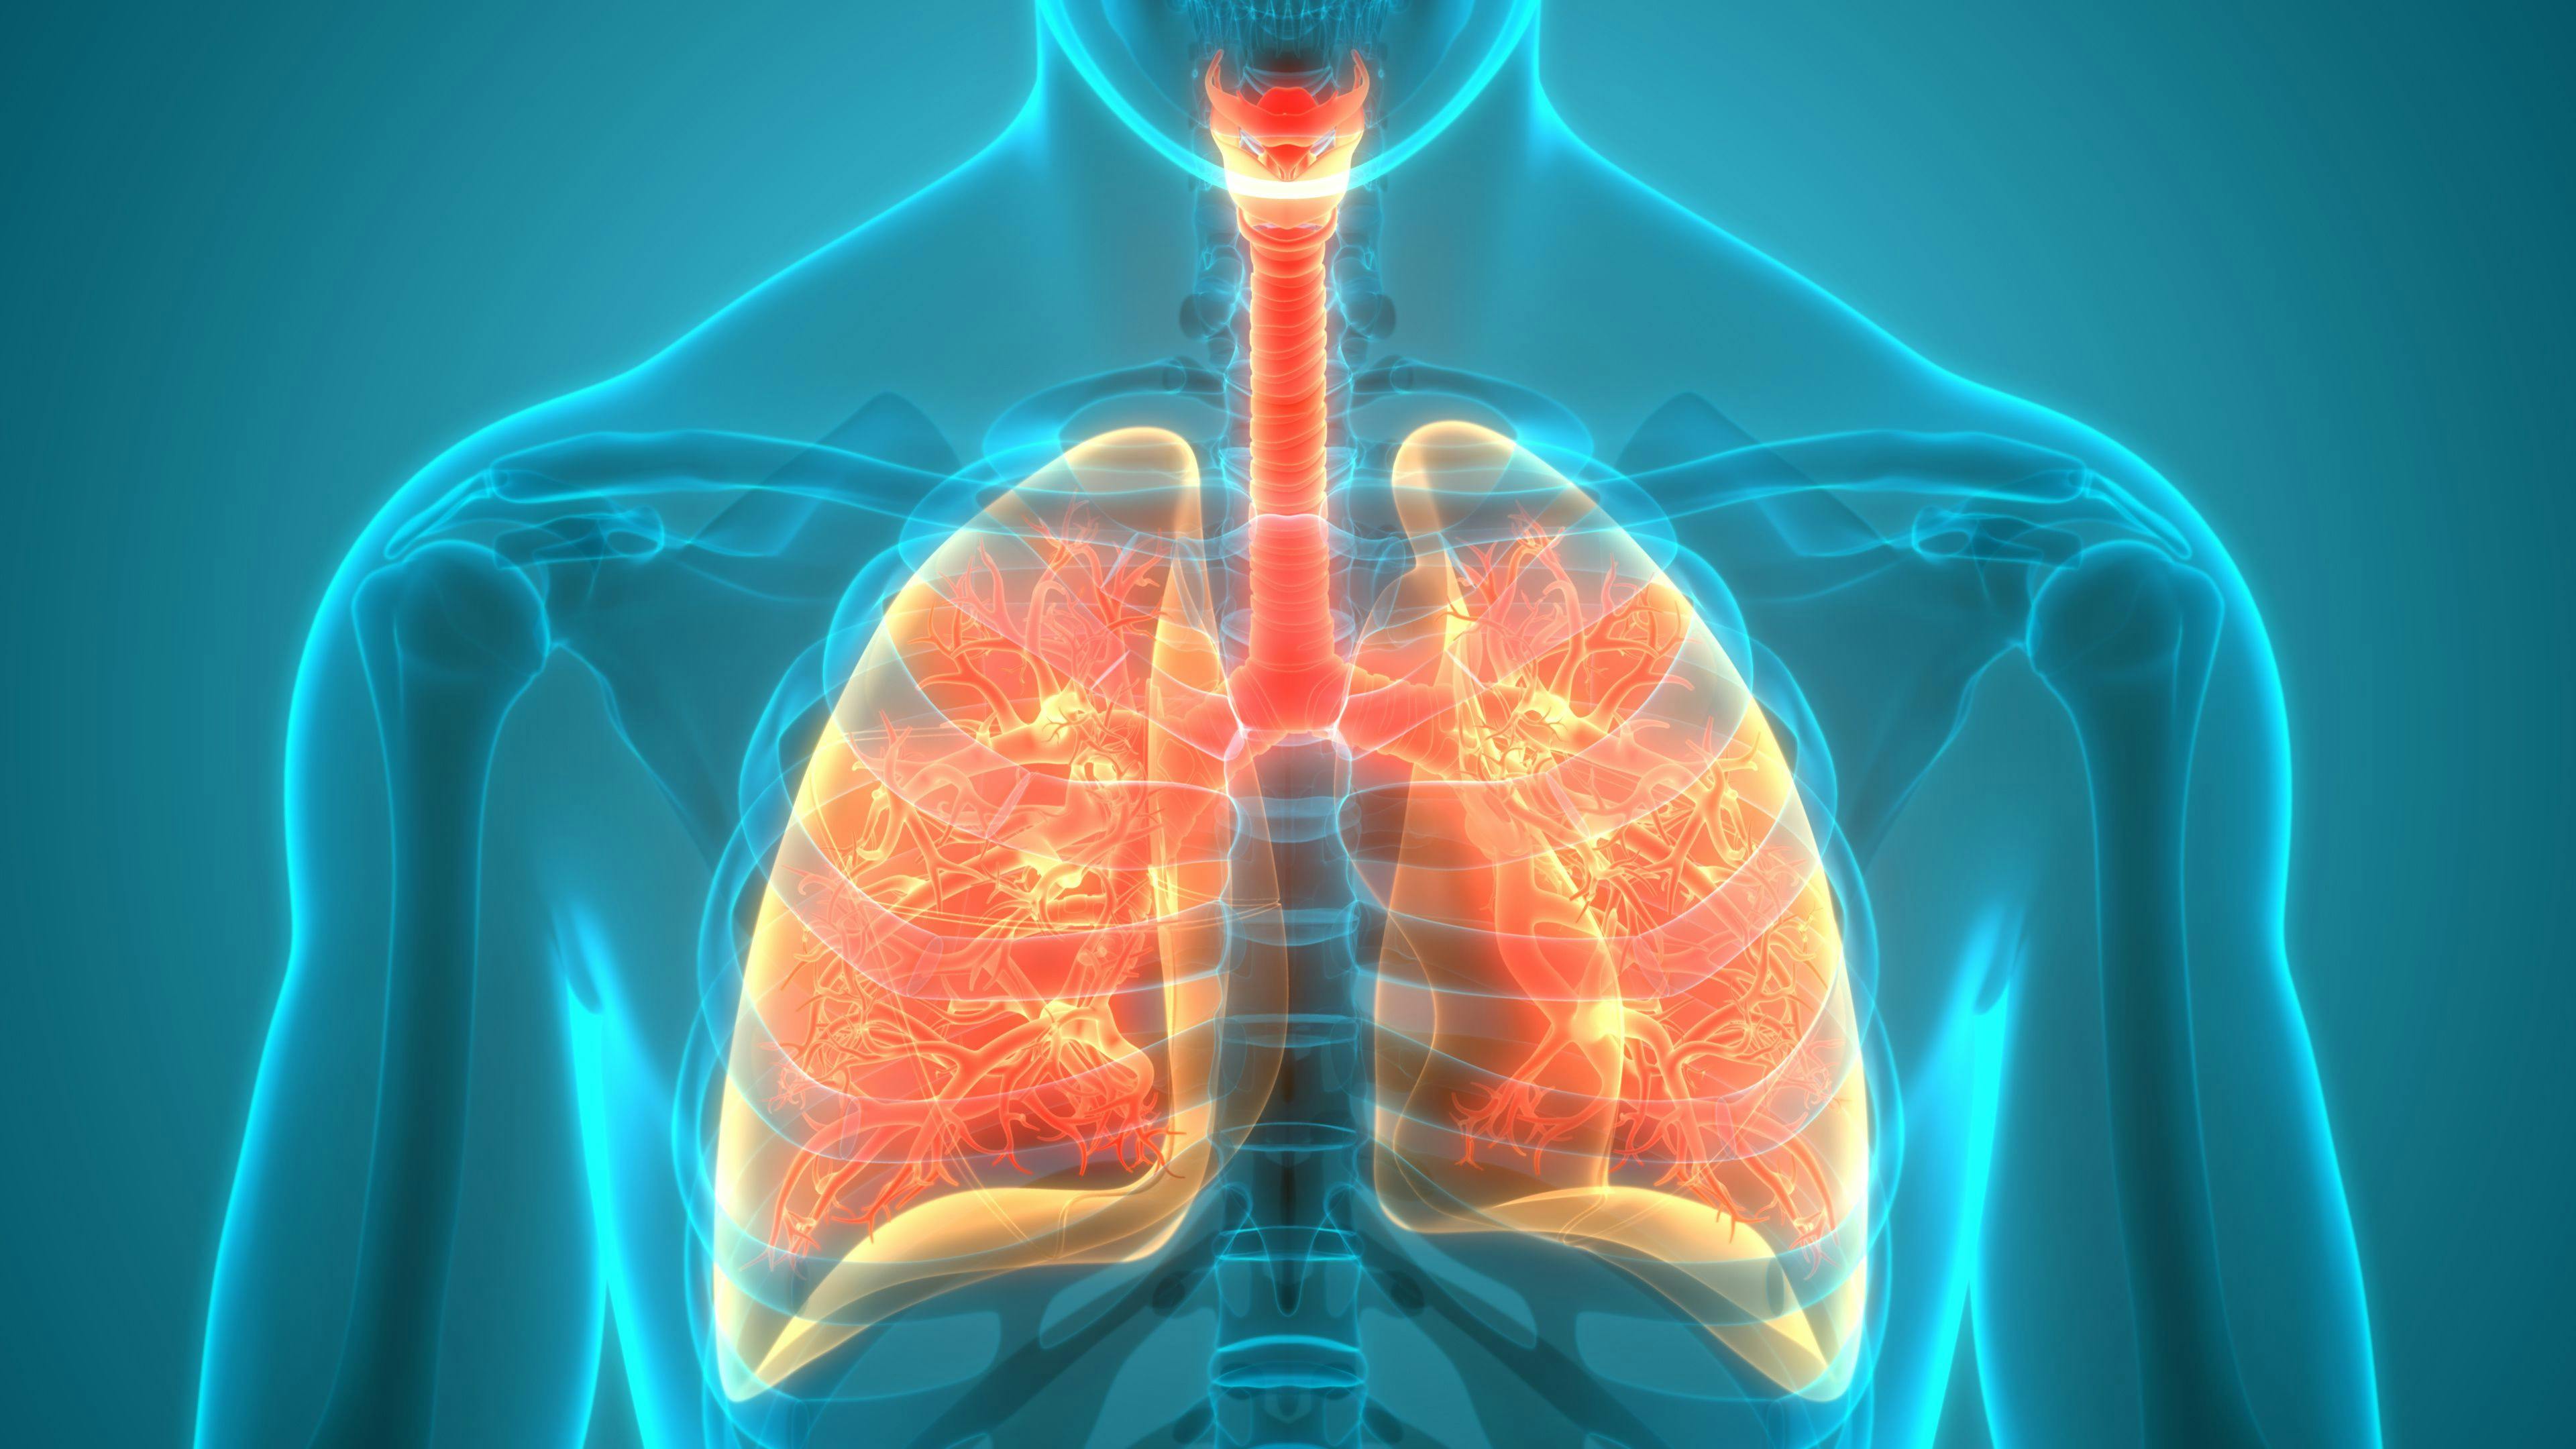 COPD Awareness Month: Pharmacists’ Role in Helping Patients Breathe Better